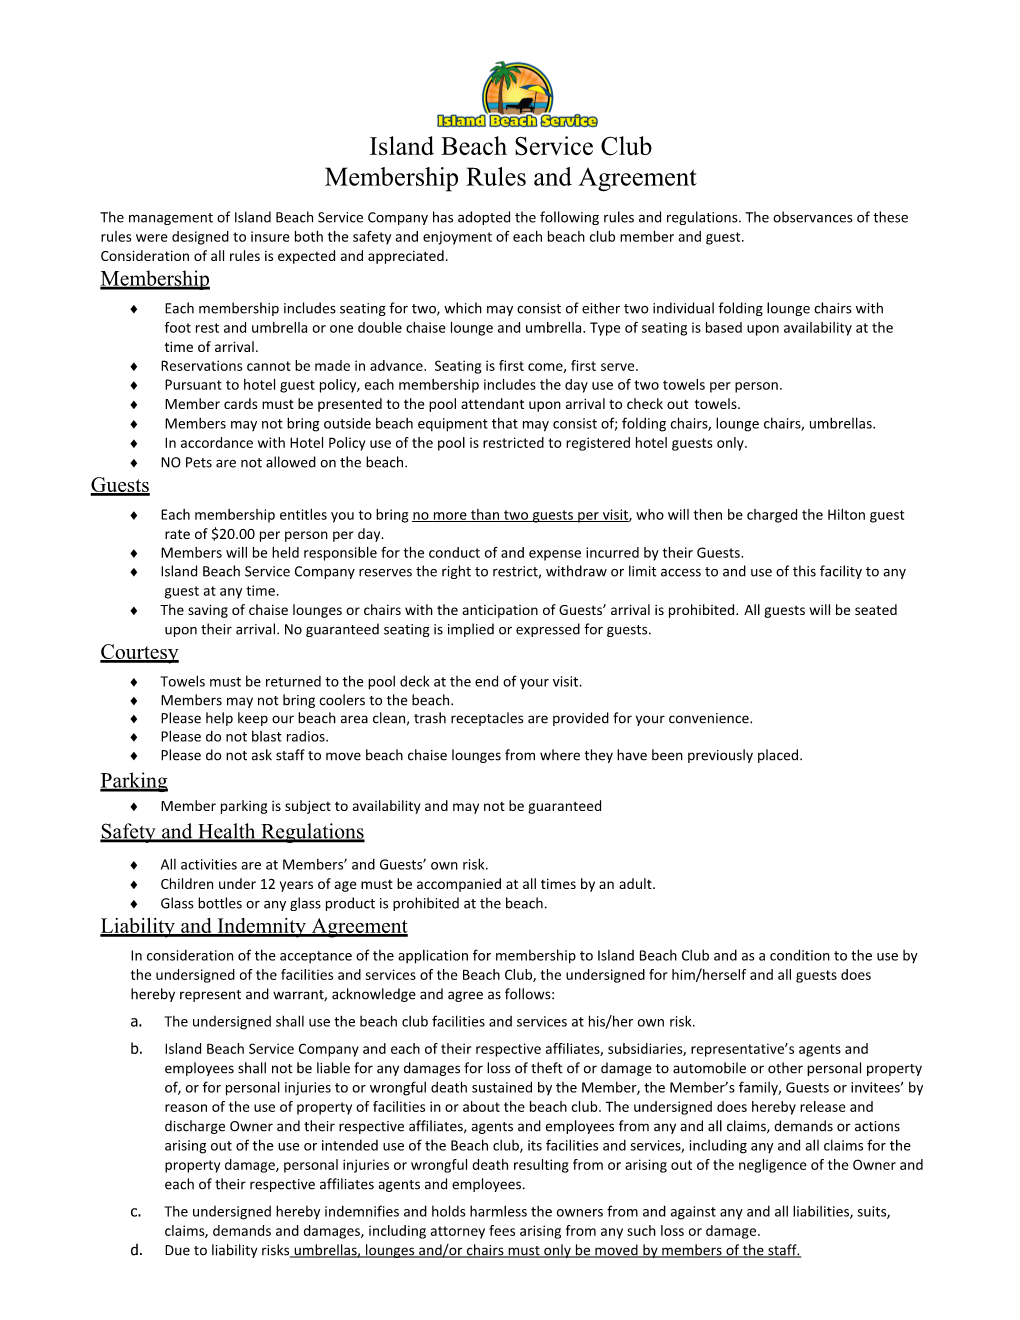 Membership Rules and Agreement